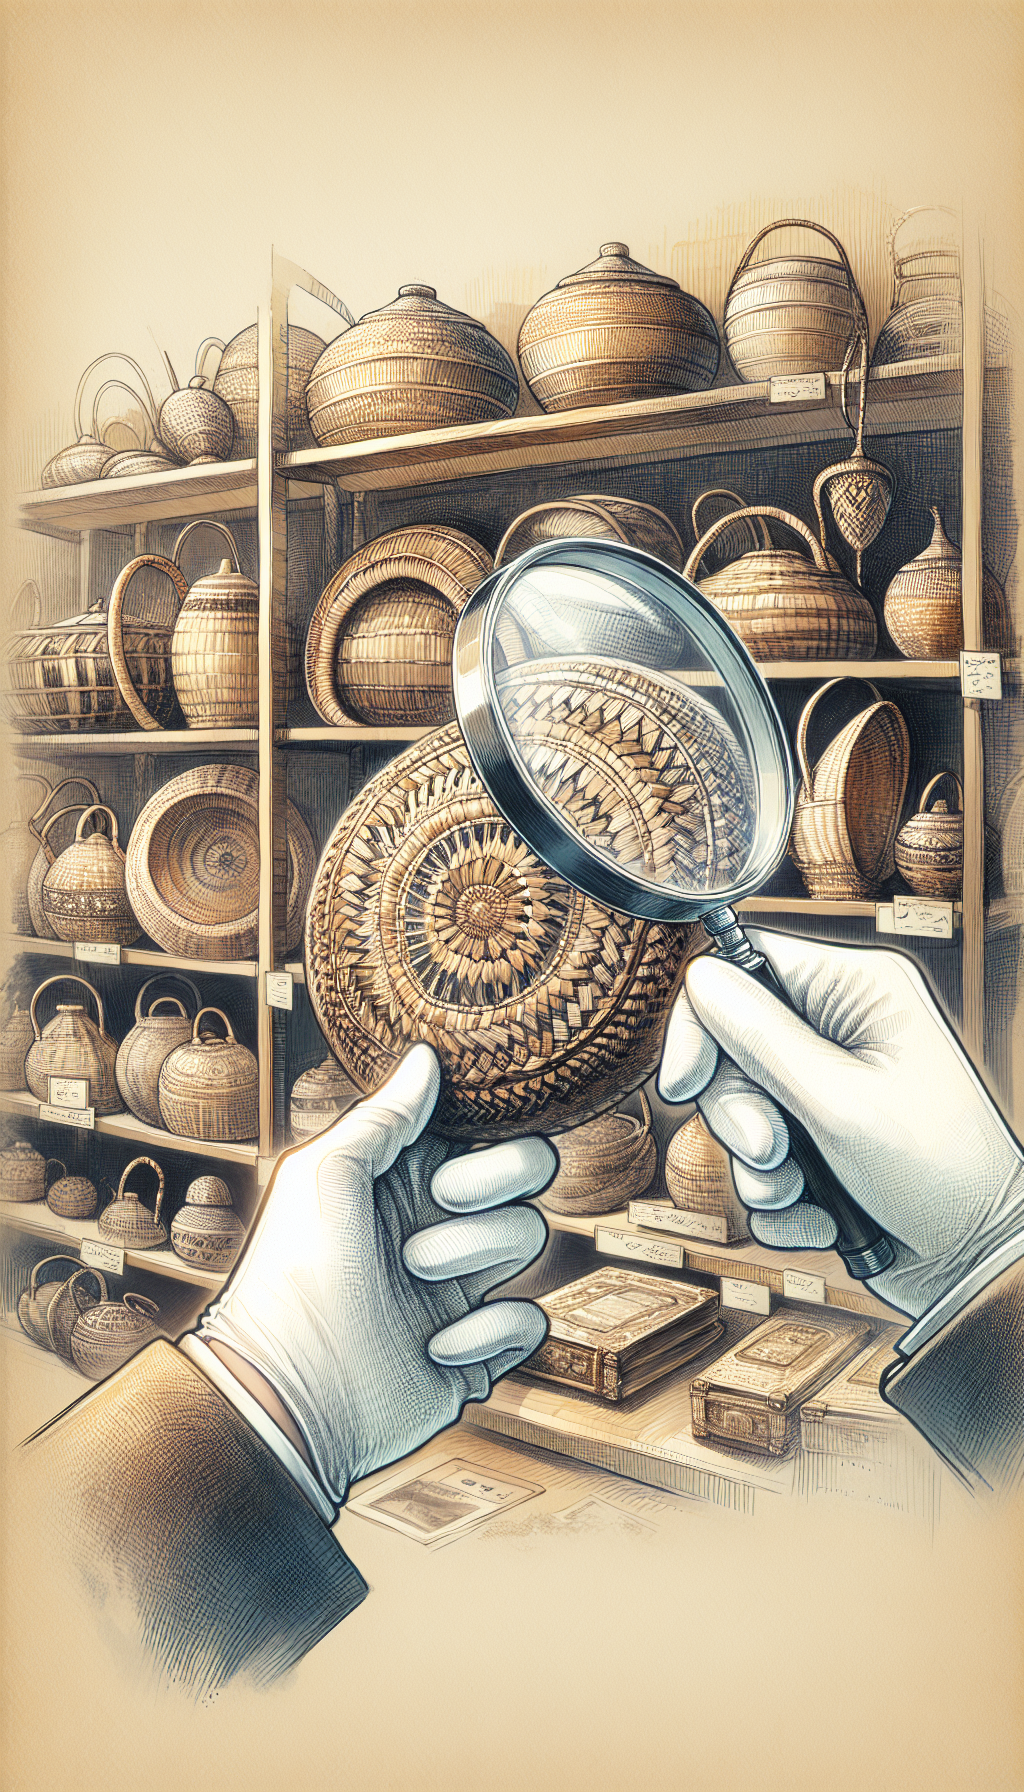 A delicate hand, gloved in white, gently holds an intricately woven basket under a magnifying glass, highlighting unique patterns and aged fibers. Shelves of varied baskets line the background, with labels denoting their origins and eras. Soft, watercolor tones blend with crisp, sketched outlines, juxtaposing the baskets' antique nature against the modern act of appraisal and care.